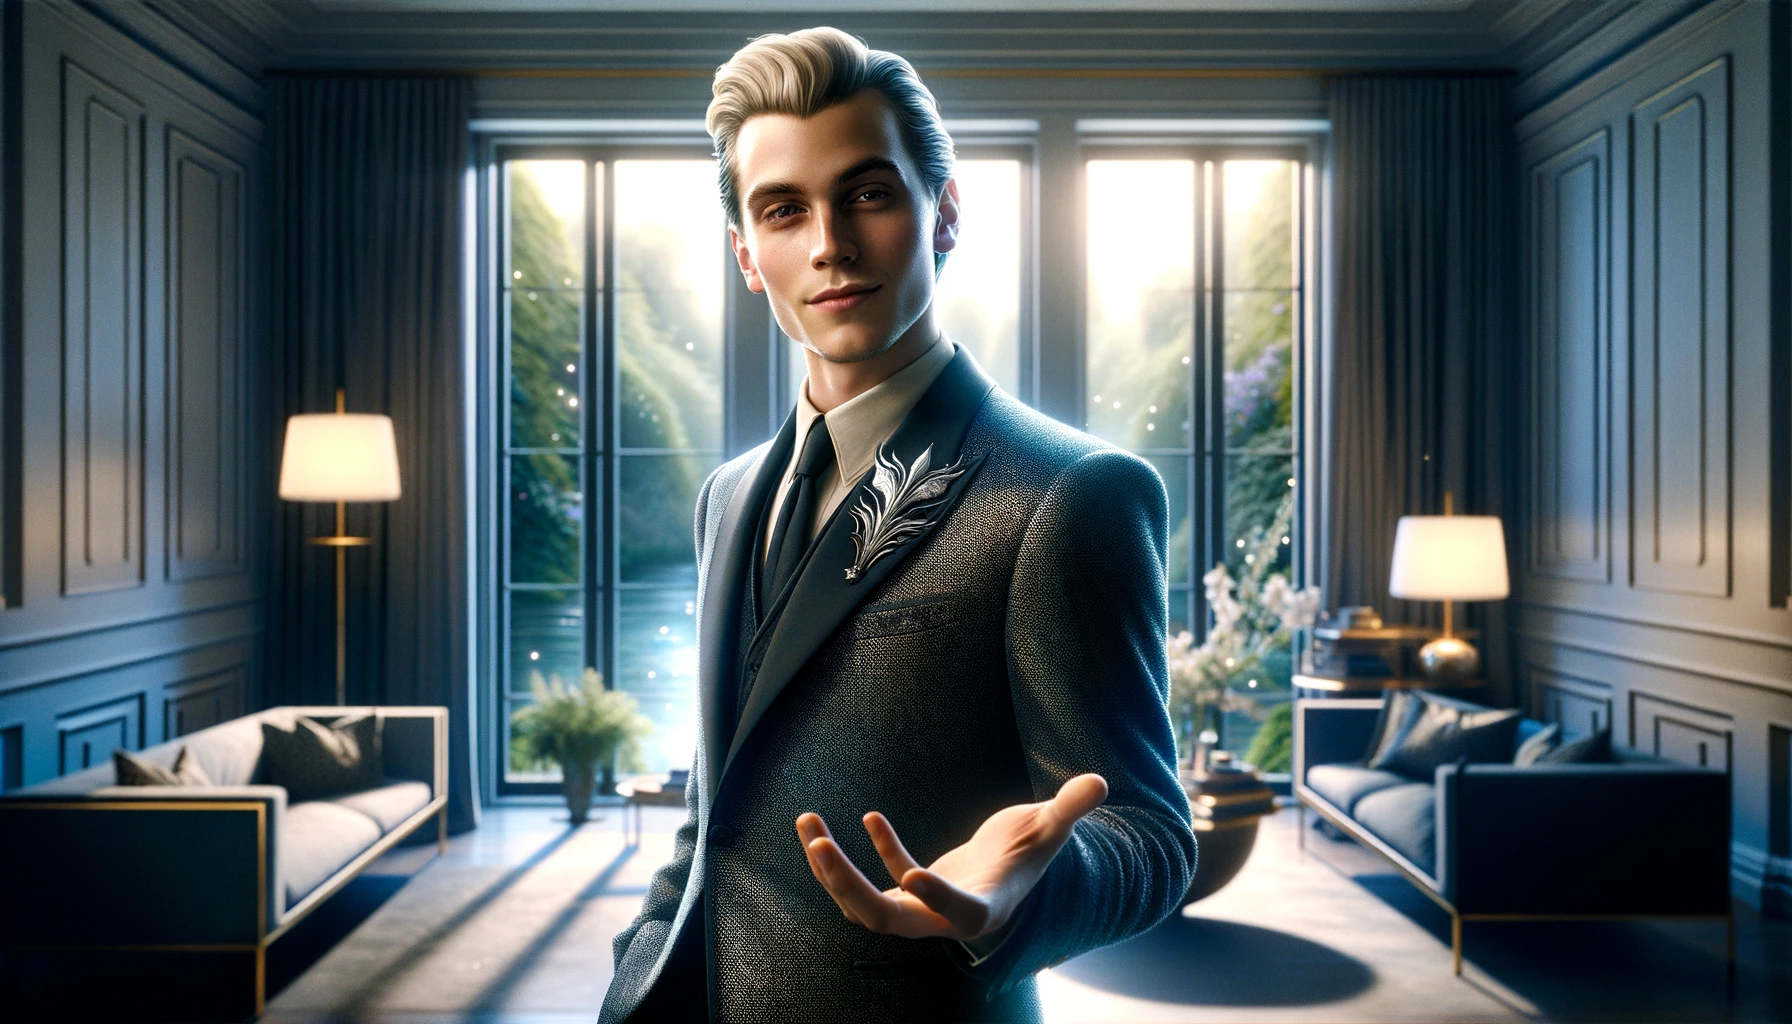 An image depicting a character inspired by the sound of the name 'Malfoy', eliciting a sense of familiarity and affinity. The character, a charismatic young man with sleek blond hair and sharp features, is shown in a welcoming and noble pose. He is dressed in a stylish, modern suit with subtle magical elements, like shimmering fabric or a hint of an enchanted accessory. The setting is an elegant, contemporary room that reflects his refined taste, with luxurious furnishings and large windows showing a serene garden outside.